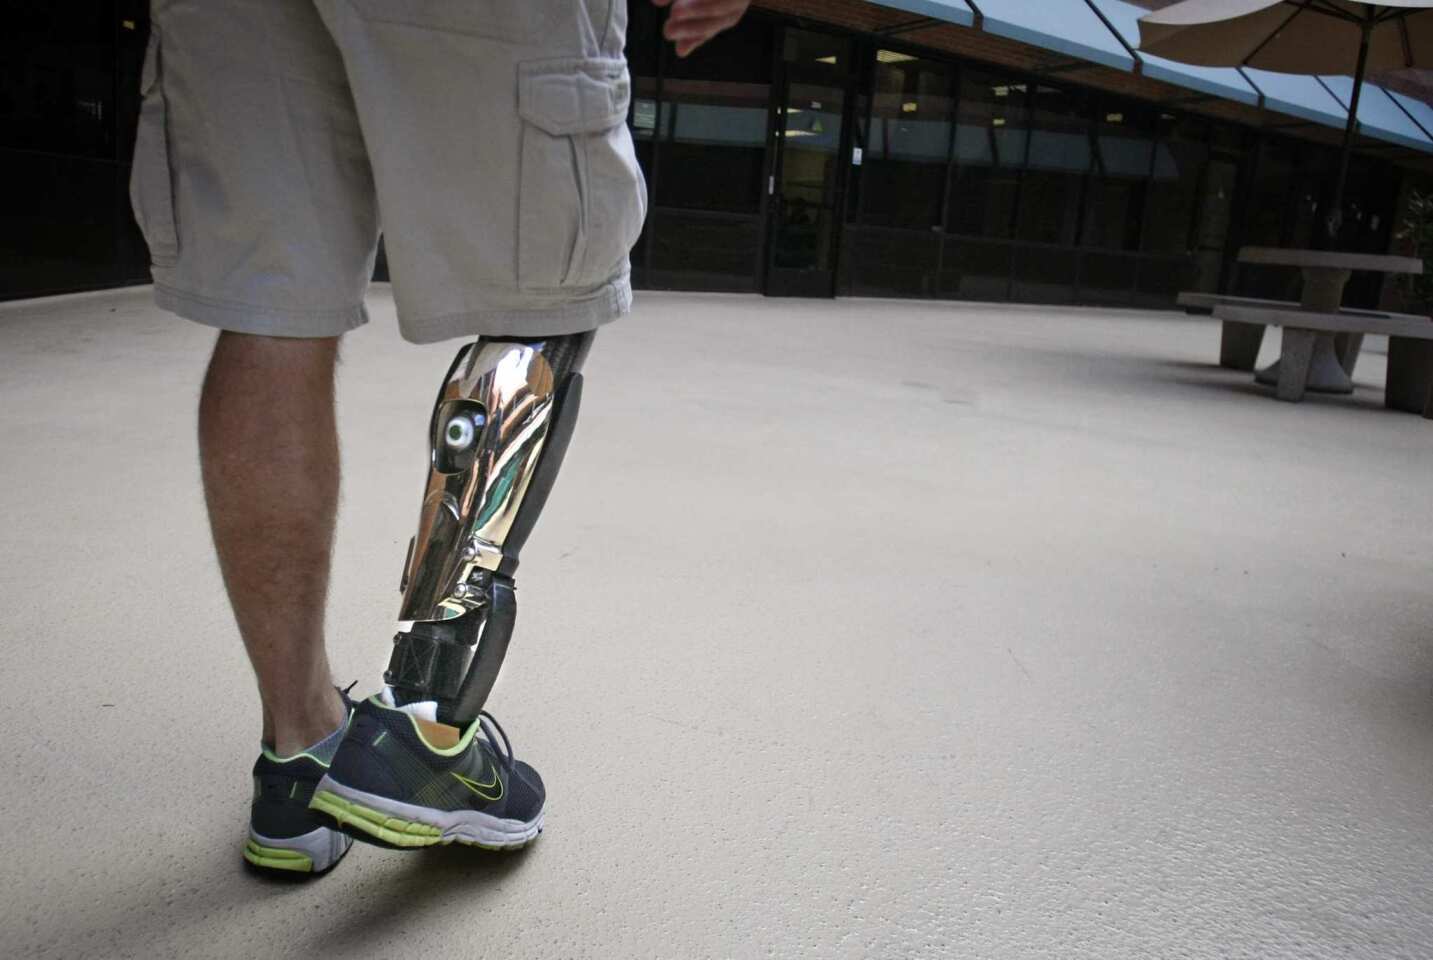 Army veteran Matt Sullivan walks to class in San Diego while wearing a customized prosthetic leg. He lost his leg in the Afghanistan war. Made by Bespoke Innovations of San Francisco, a polished metal fairing surrounds an existing prosthetic leg and is shaped like the calf of his good leg.